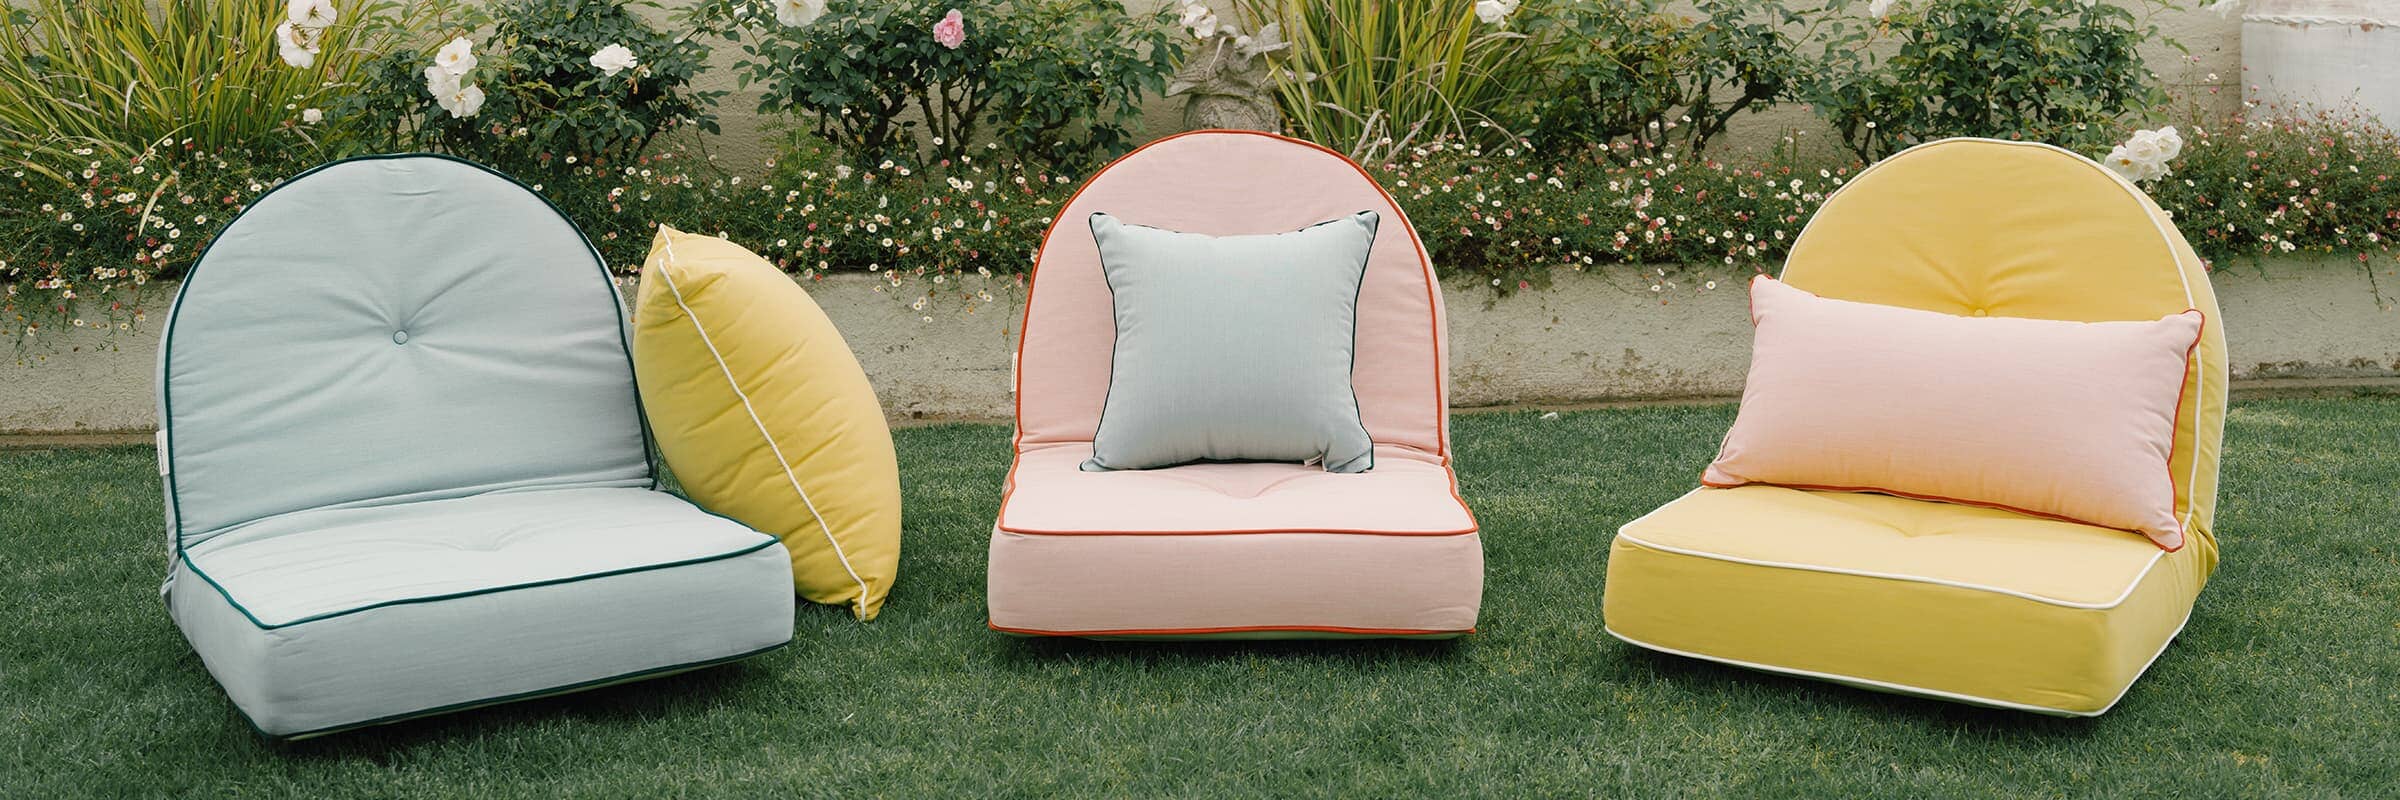 Brightly colored outdoor pillows on a lawn